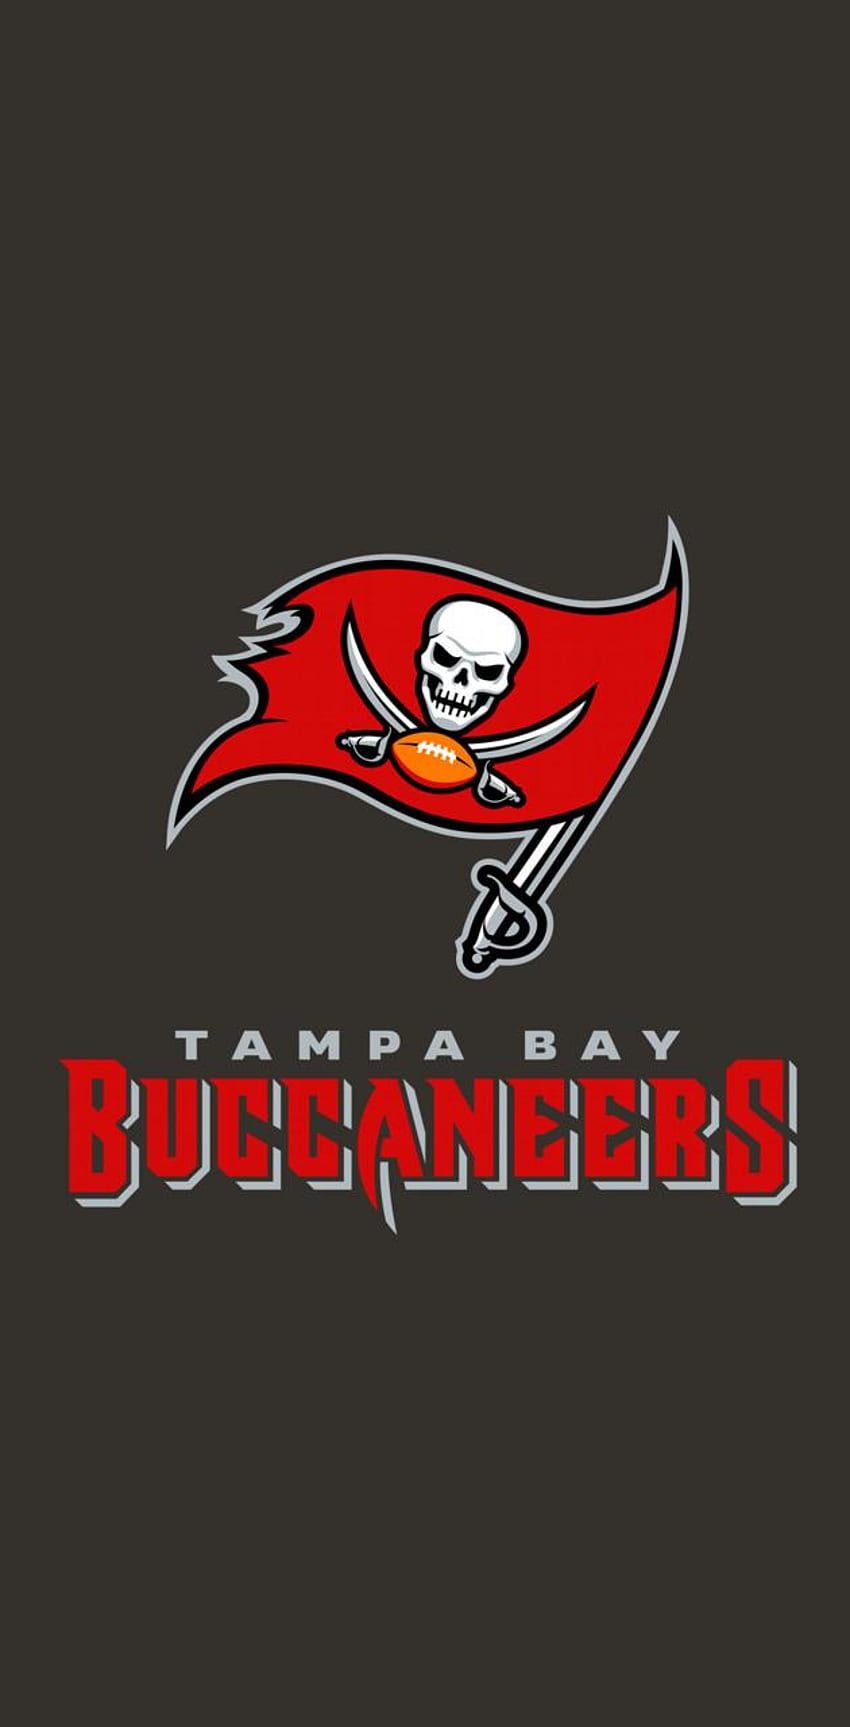 Tampa Bay Buccaneers on Twitter Buccaneers wallpapers available for  desktop iPhone and Android Check them out DOWNLOAD NOW gtgt  httpstcontqOCx2lFa httpstcoo1lzydIG7V  Twitter